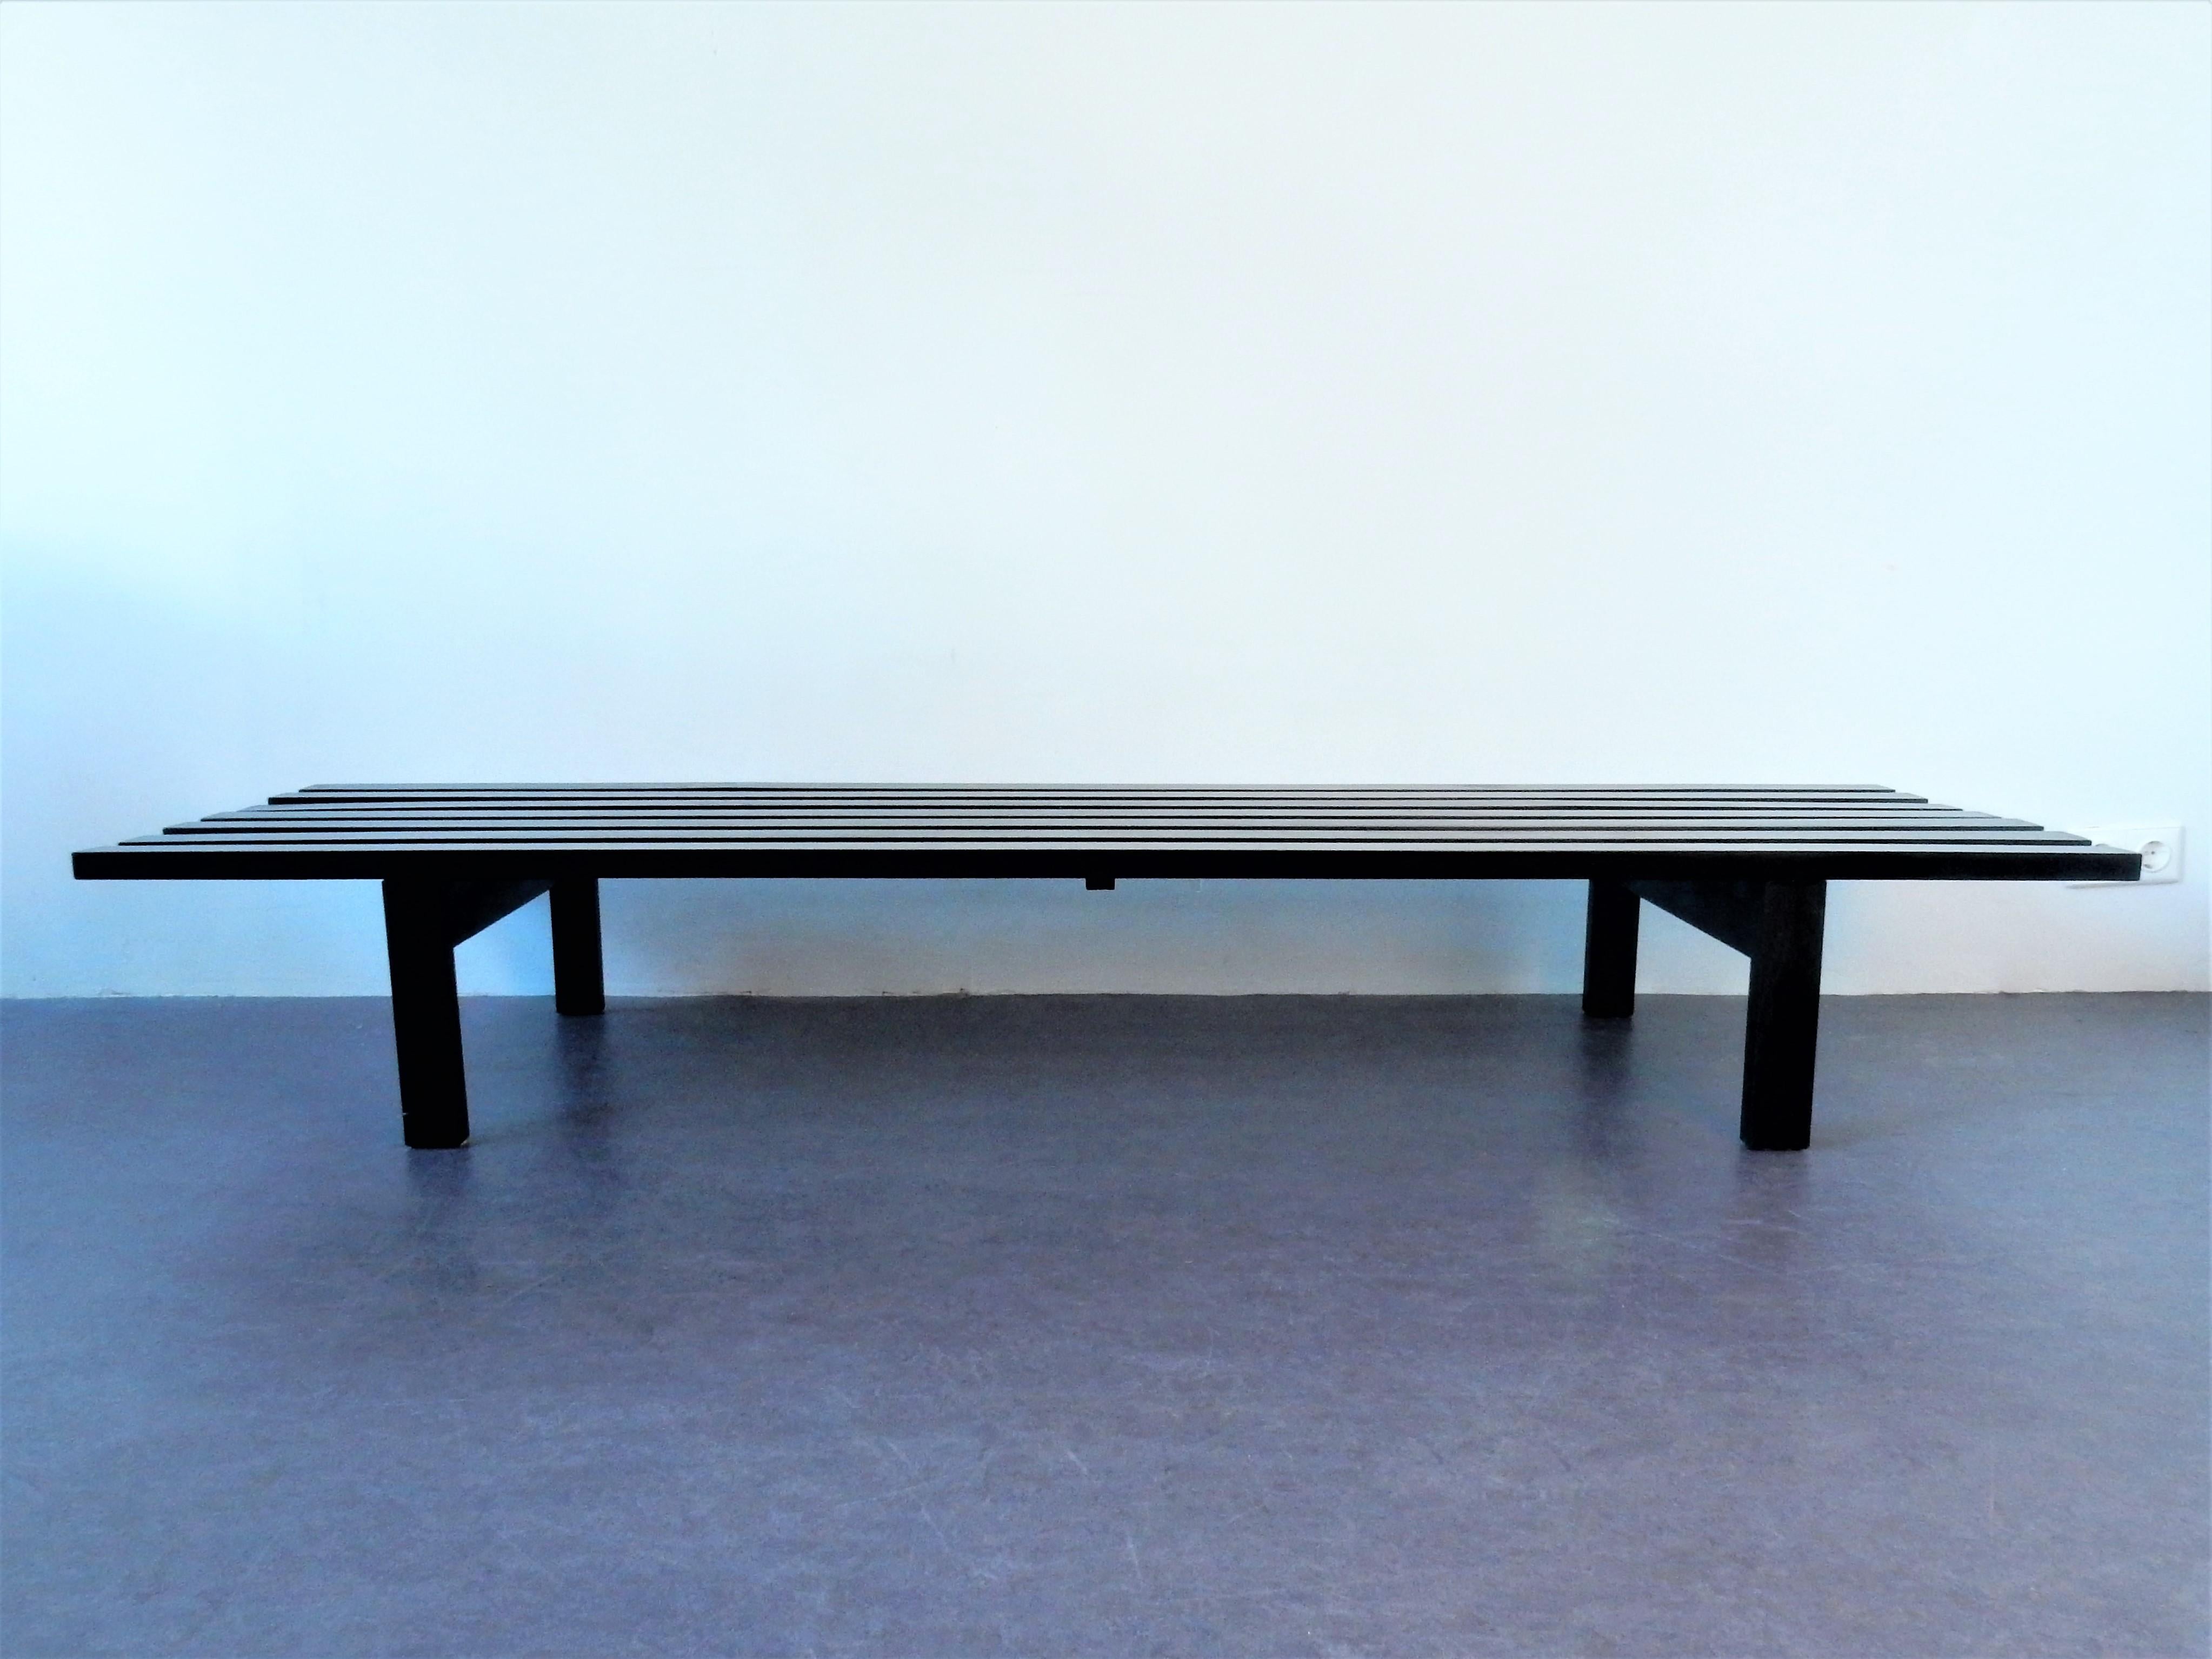 This BZ82 slat bench was designed on request of Stedelijk Museum, Amsterdam, by Martin Visser. It is made of solid, matt varnished ash wood and has the original sliding laminated shelf. It is marked with the label of 't Spectrum underneath the